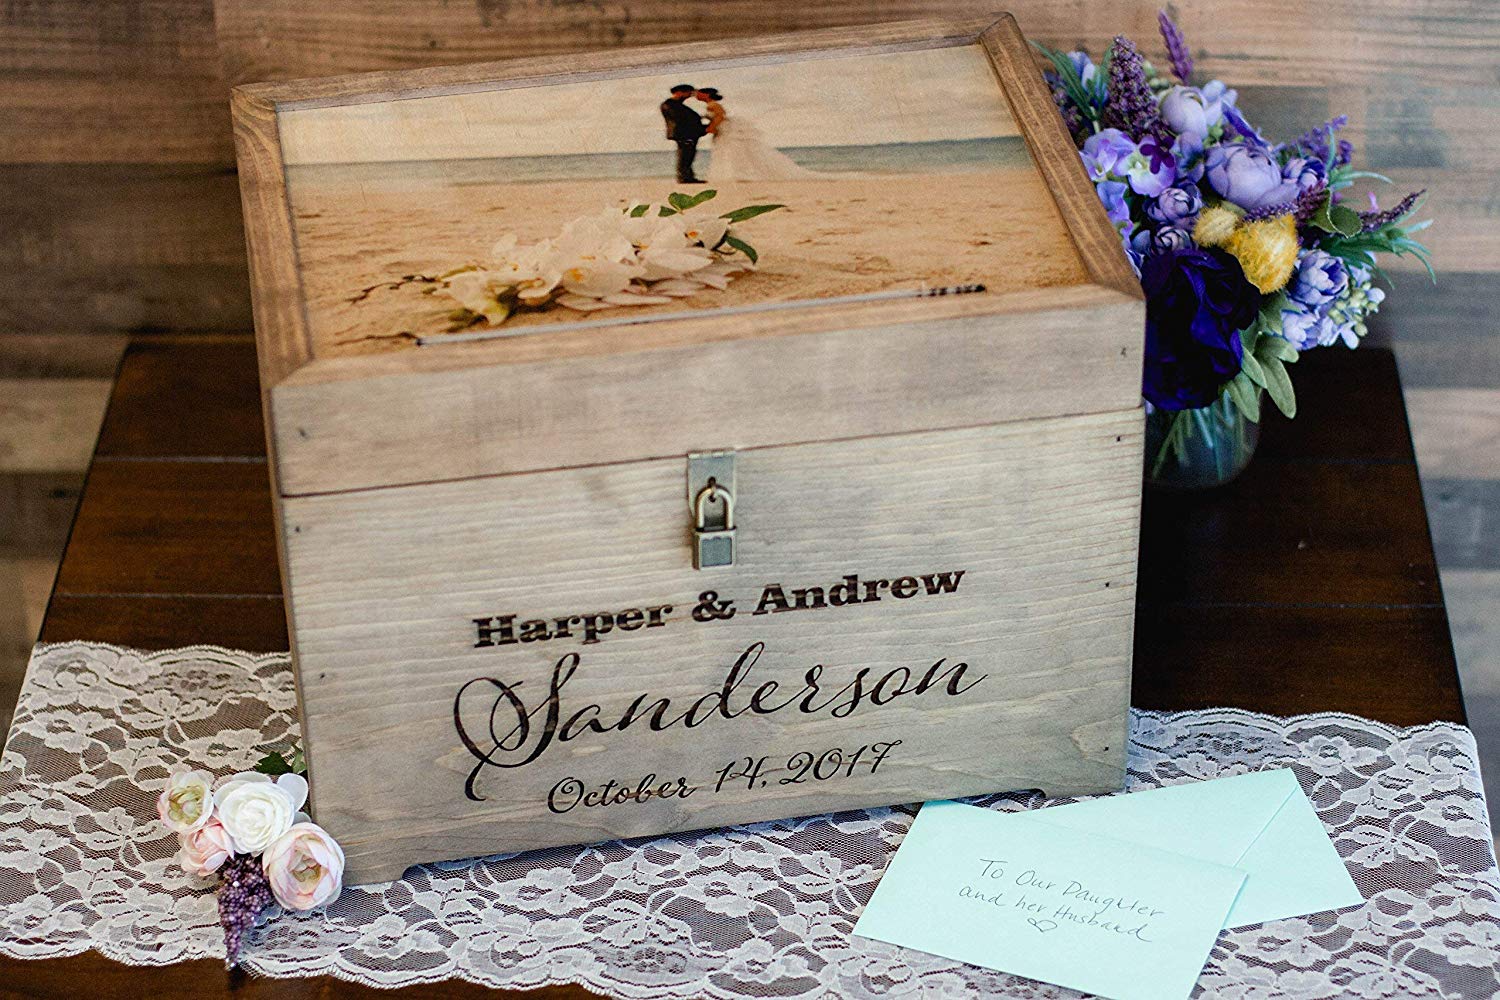 Write Your Own Personalized Wedding Wood Card Box